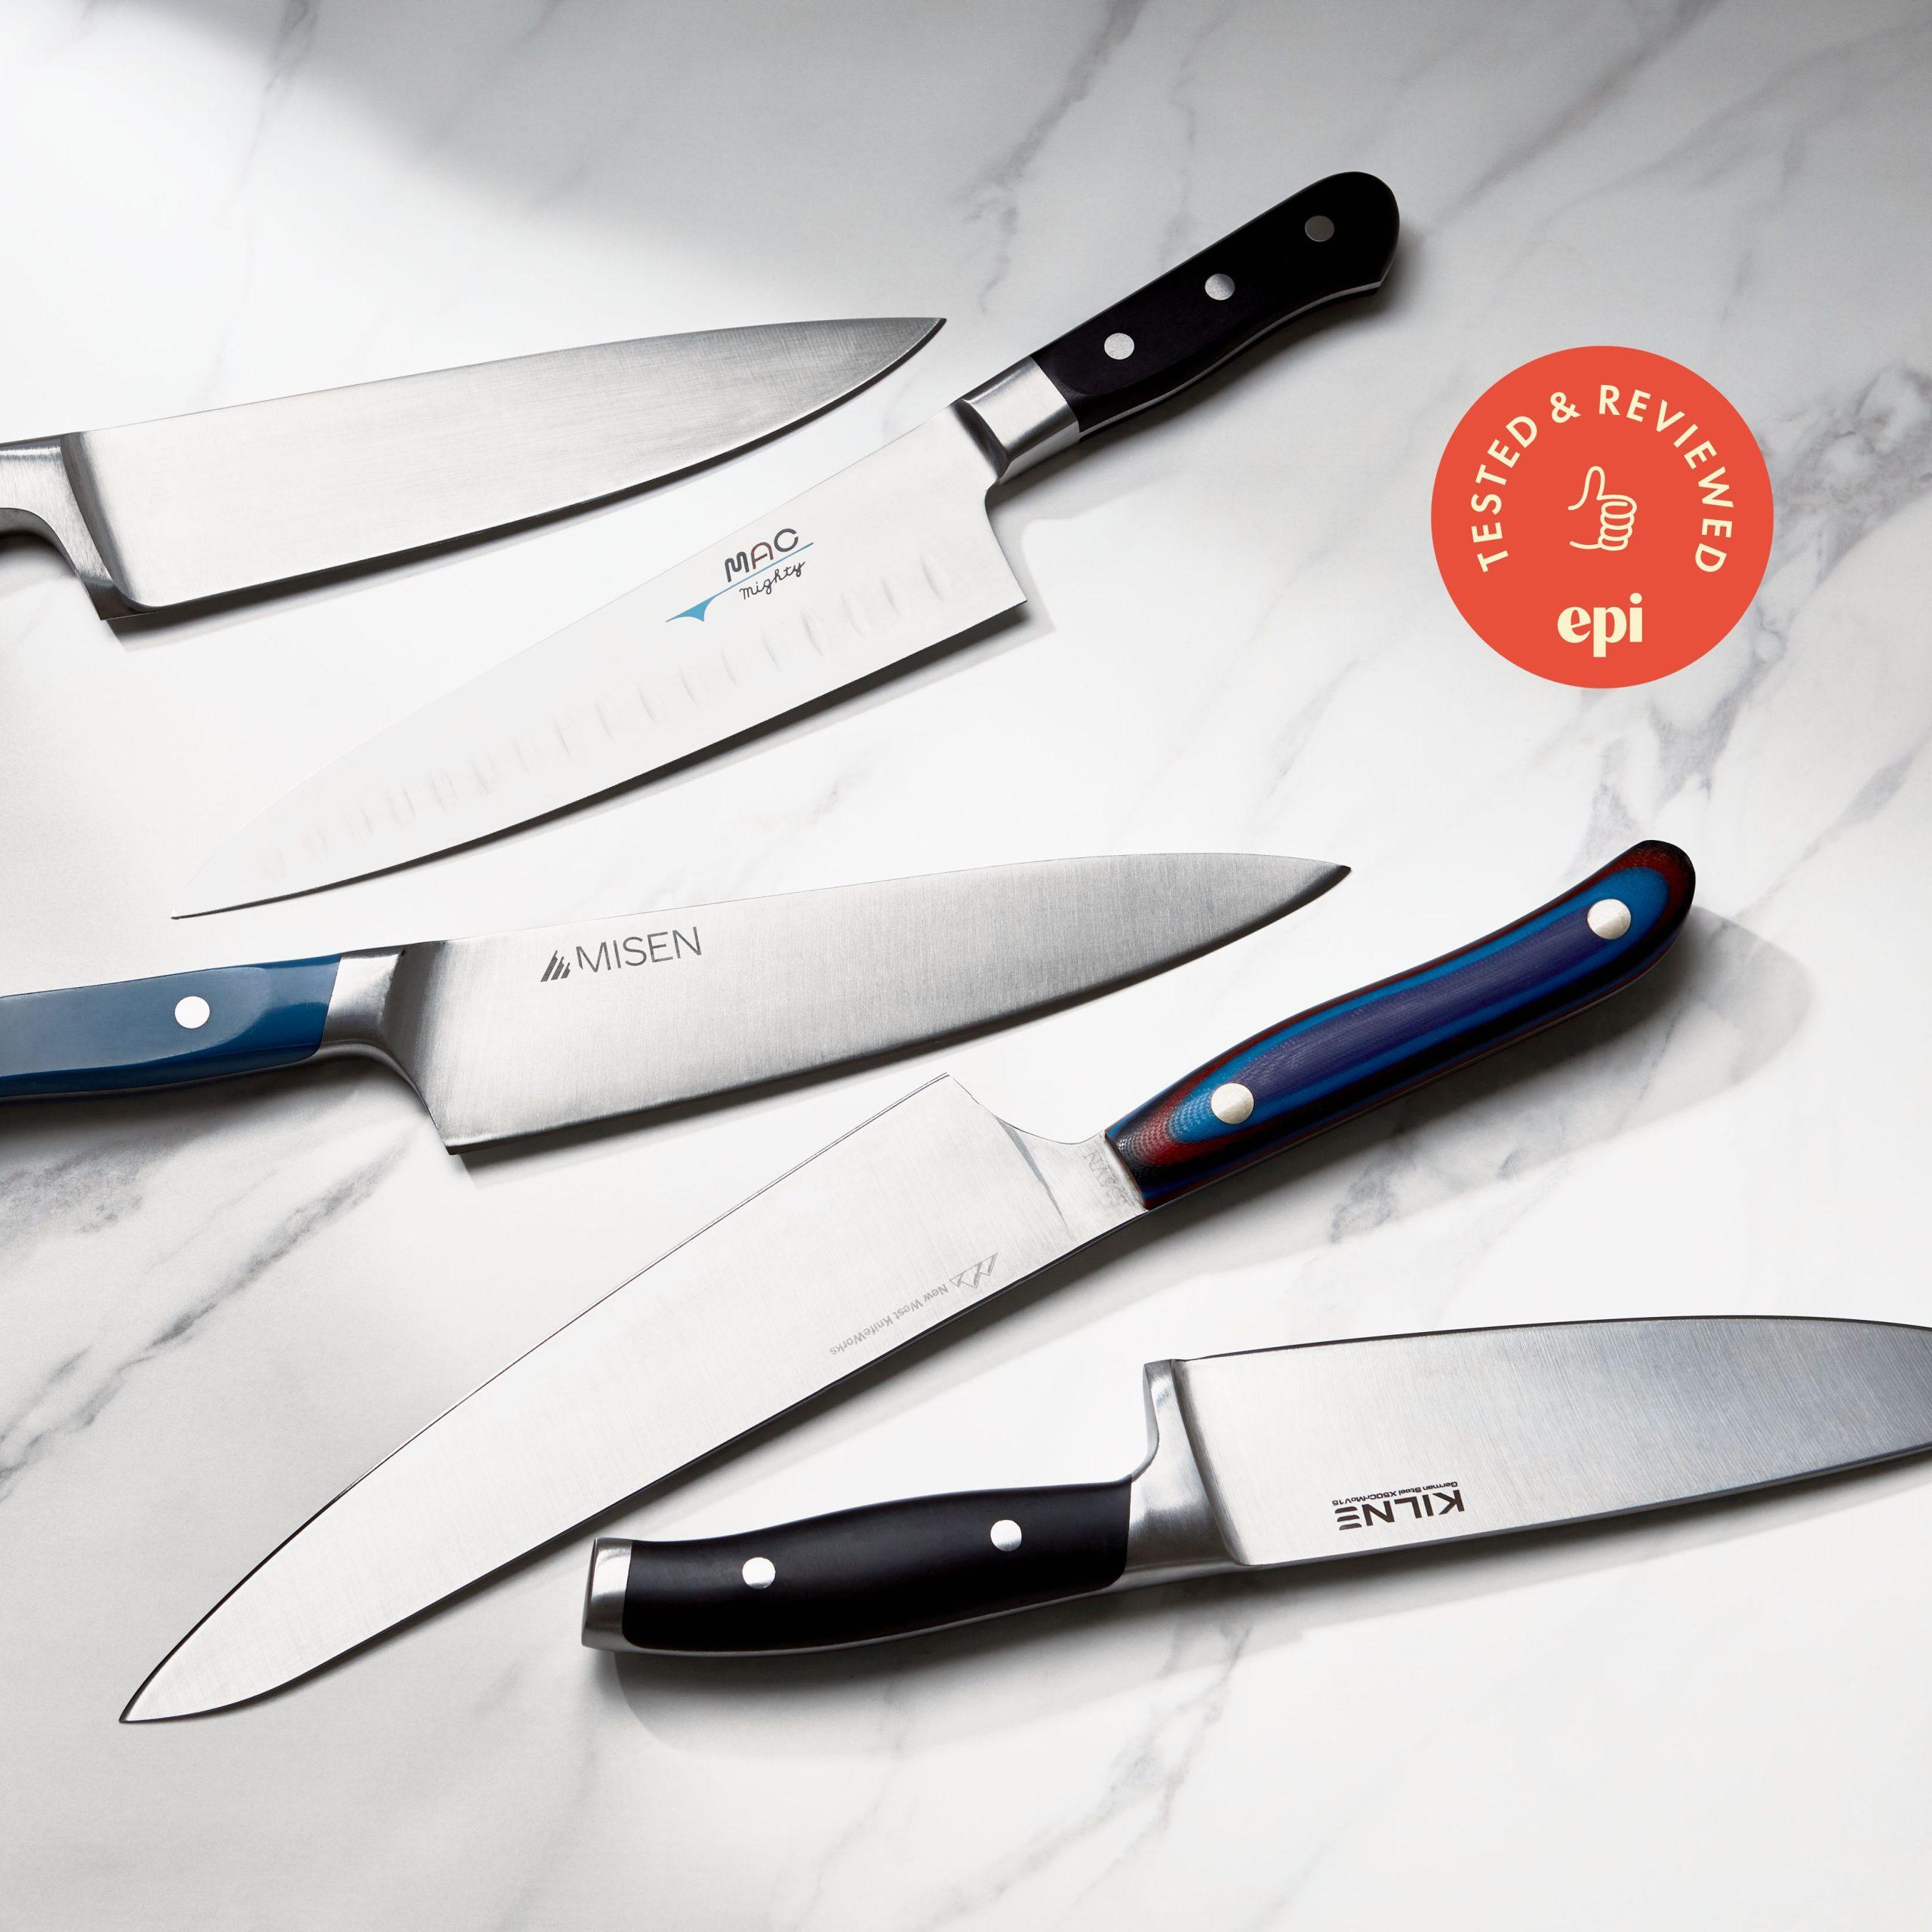 Zwilling Knife Comparison Chart: Your Ultimate Guide.